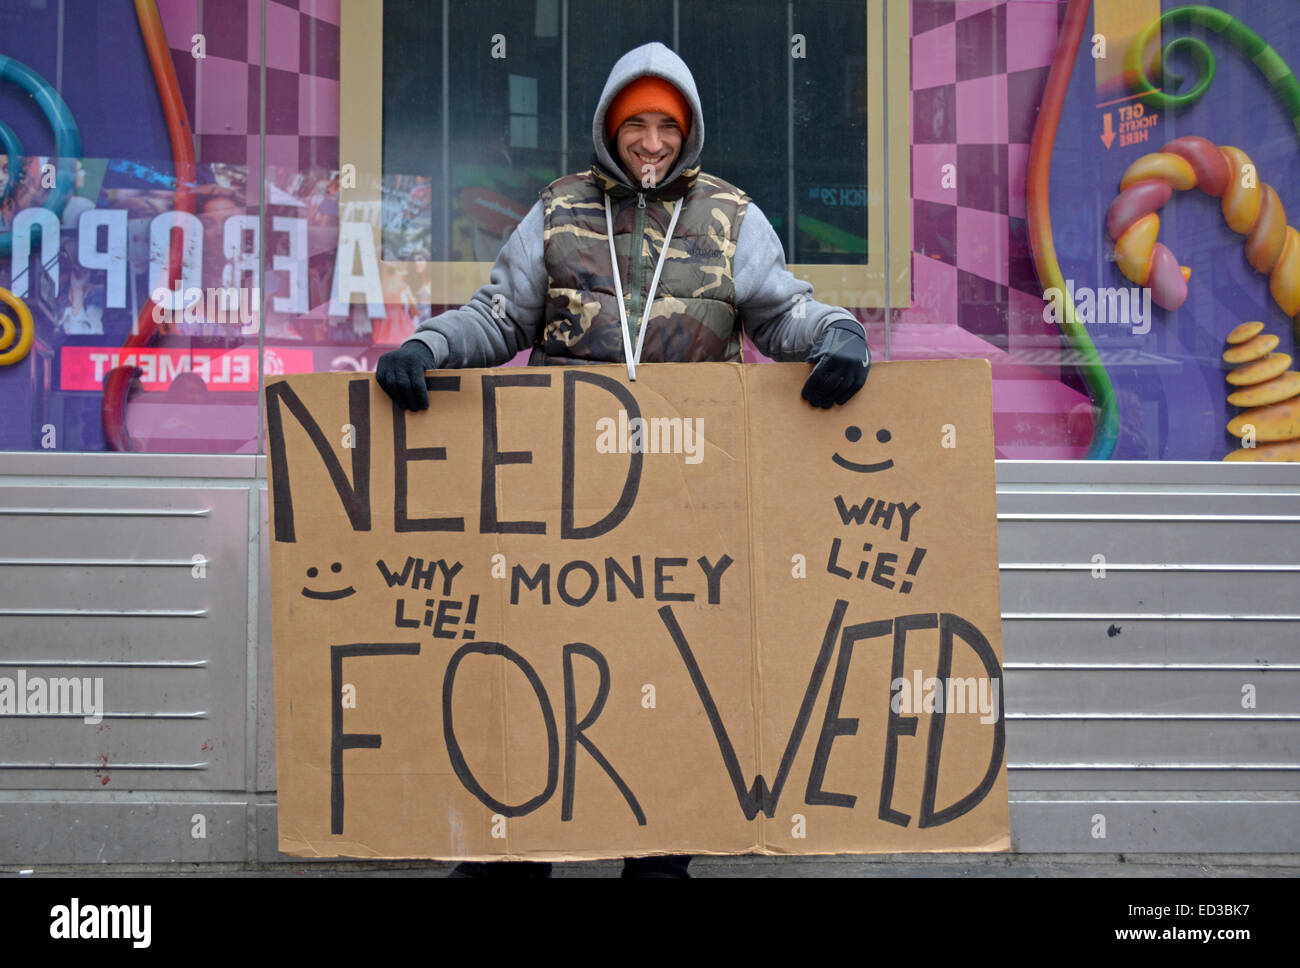 Steven a peddler in Times Square in Manhattan, New York City with a funny sign asking for money for weed. Stock Photo